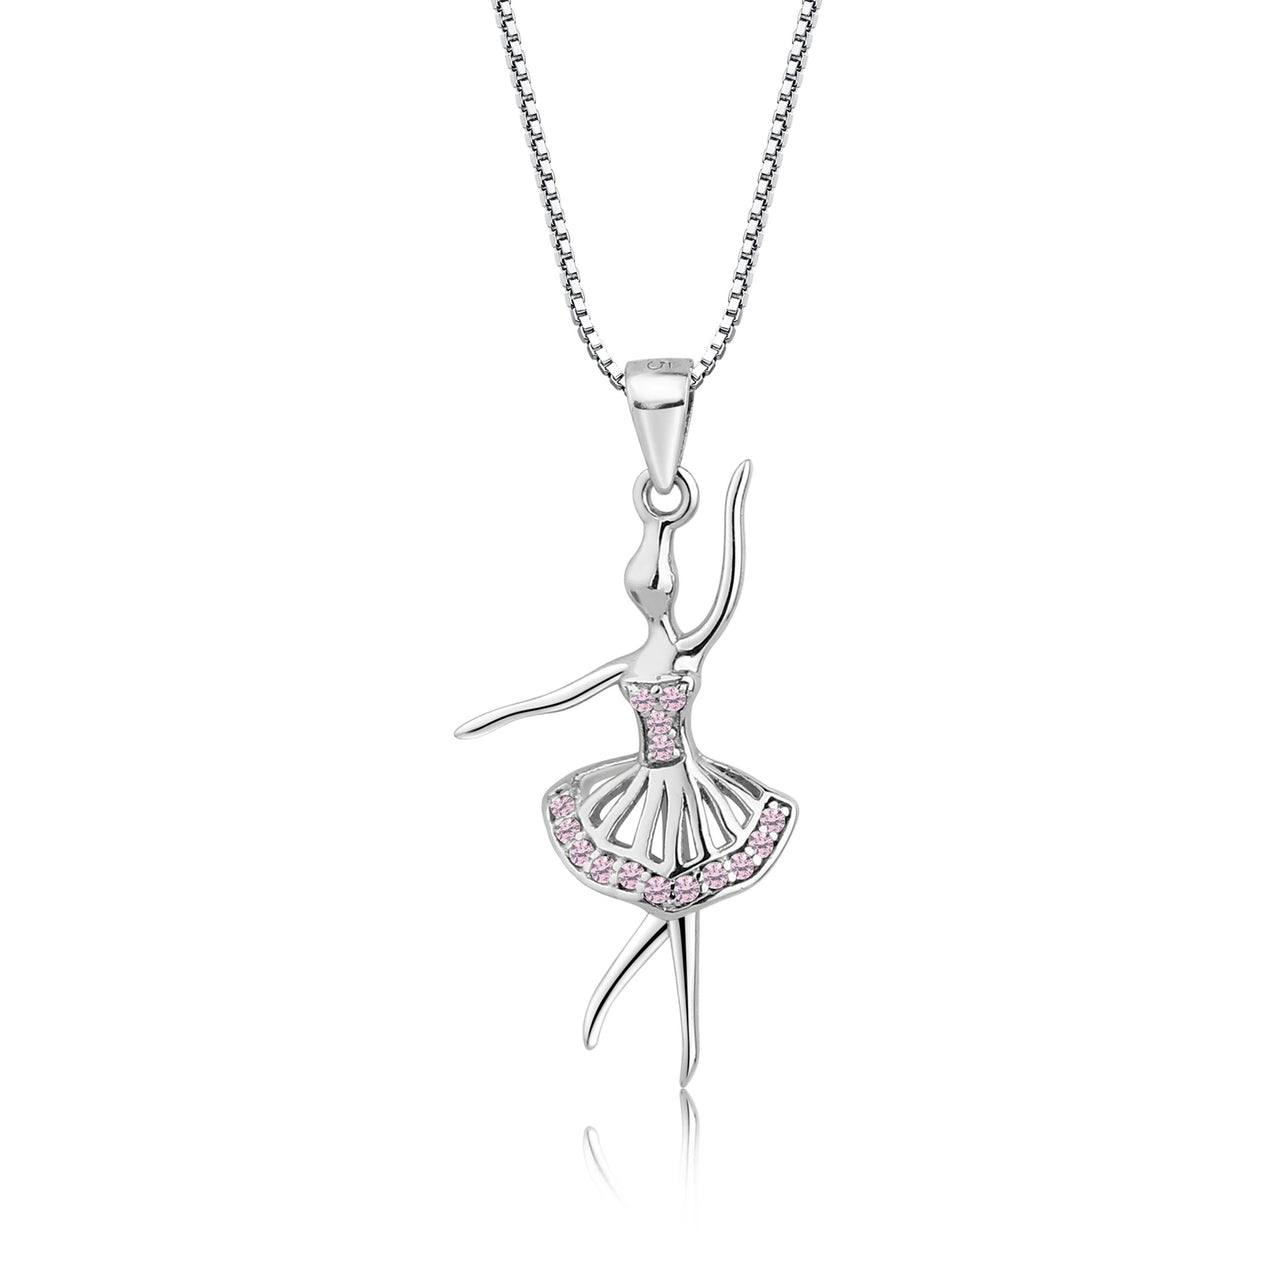 Cherished Moments Sterling Silver Ballerina Necklace